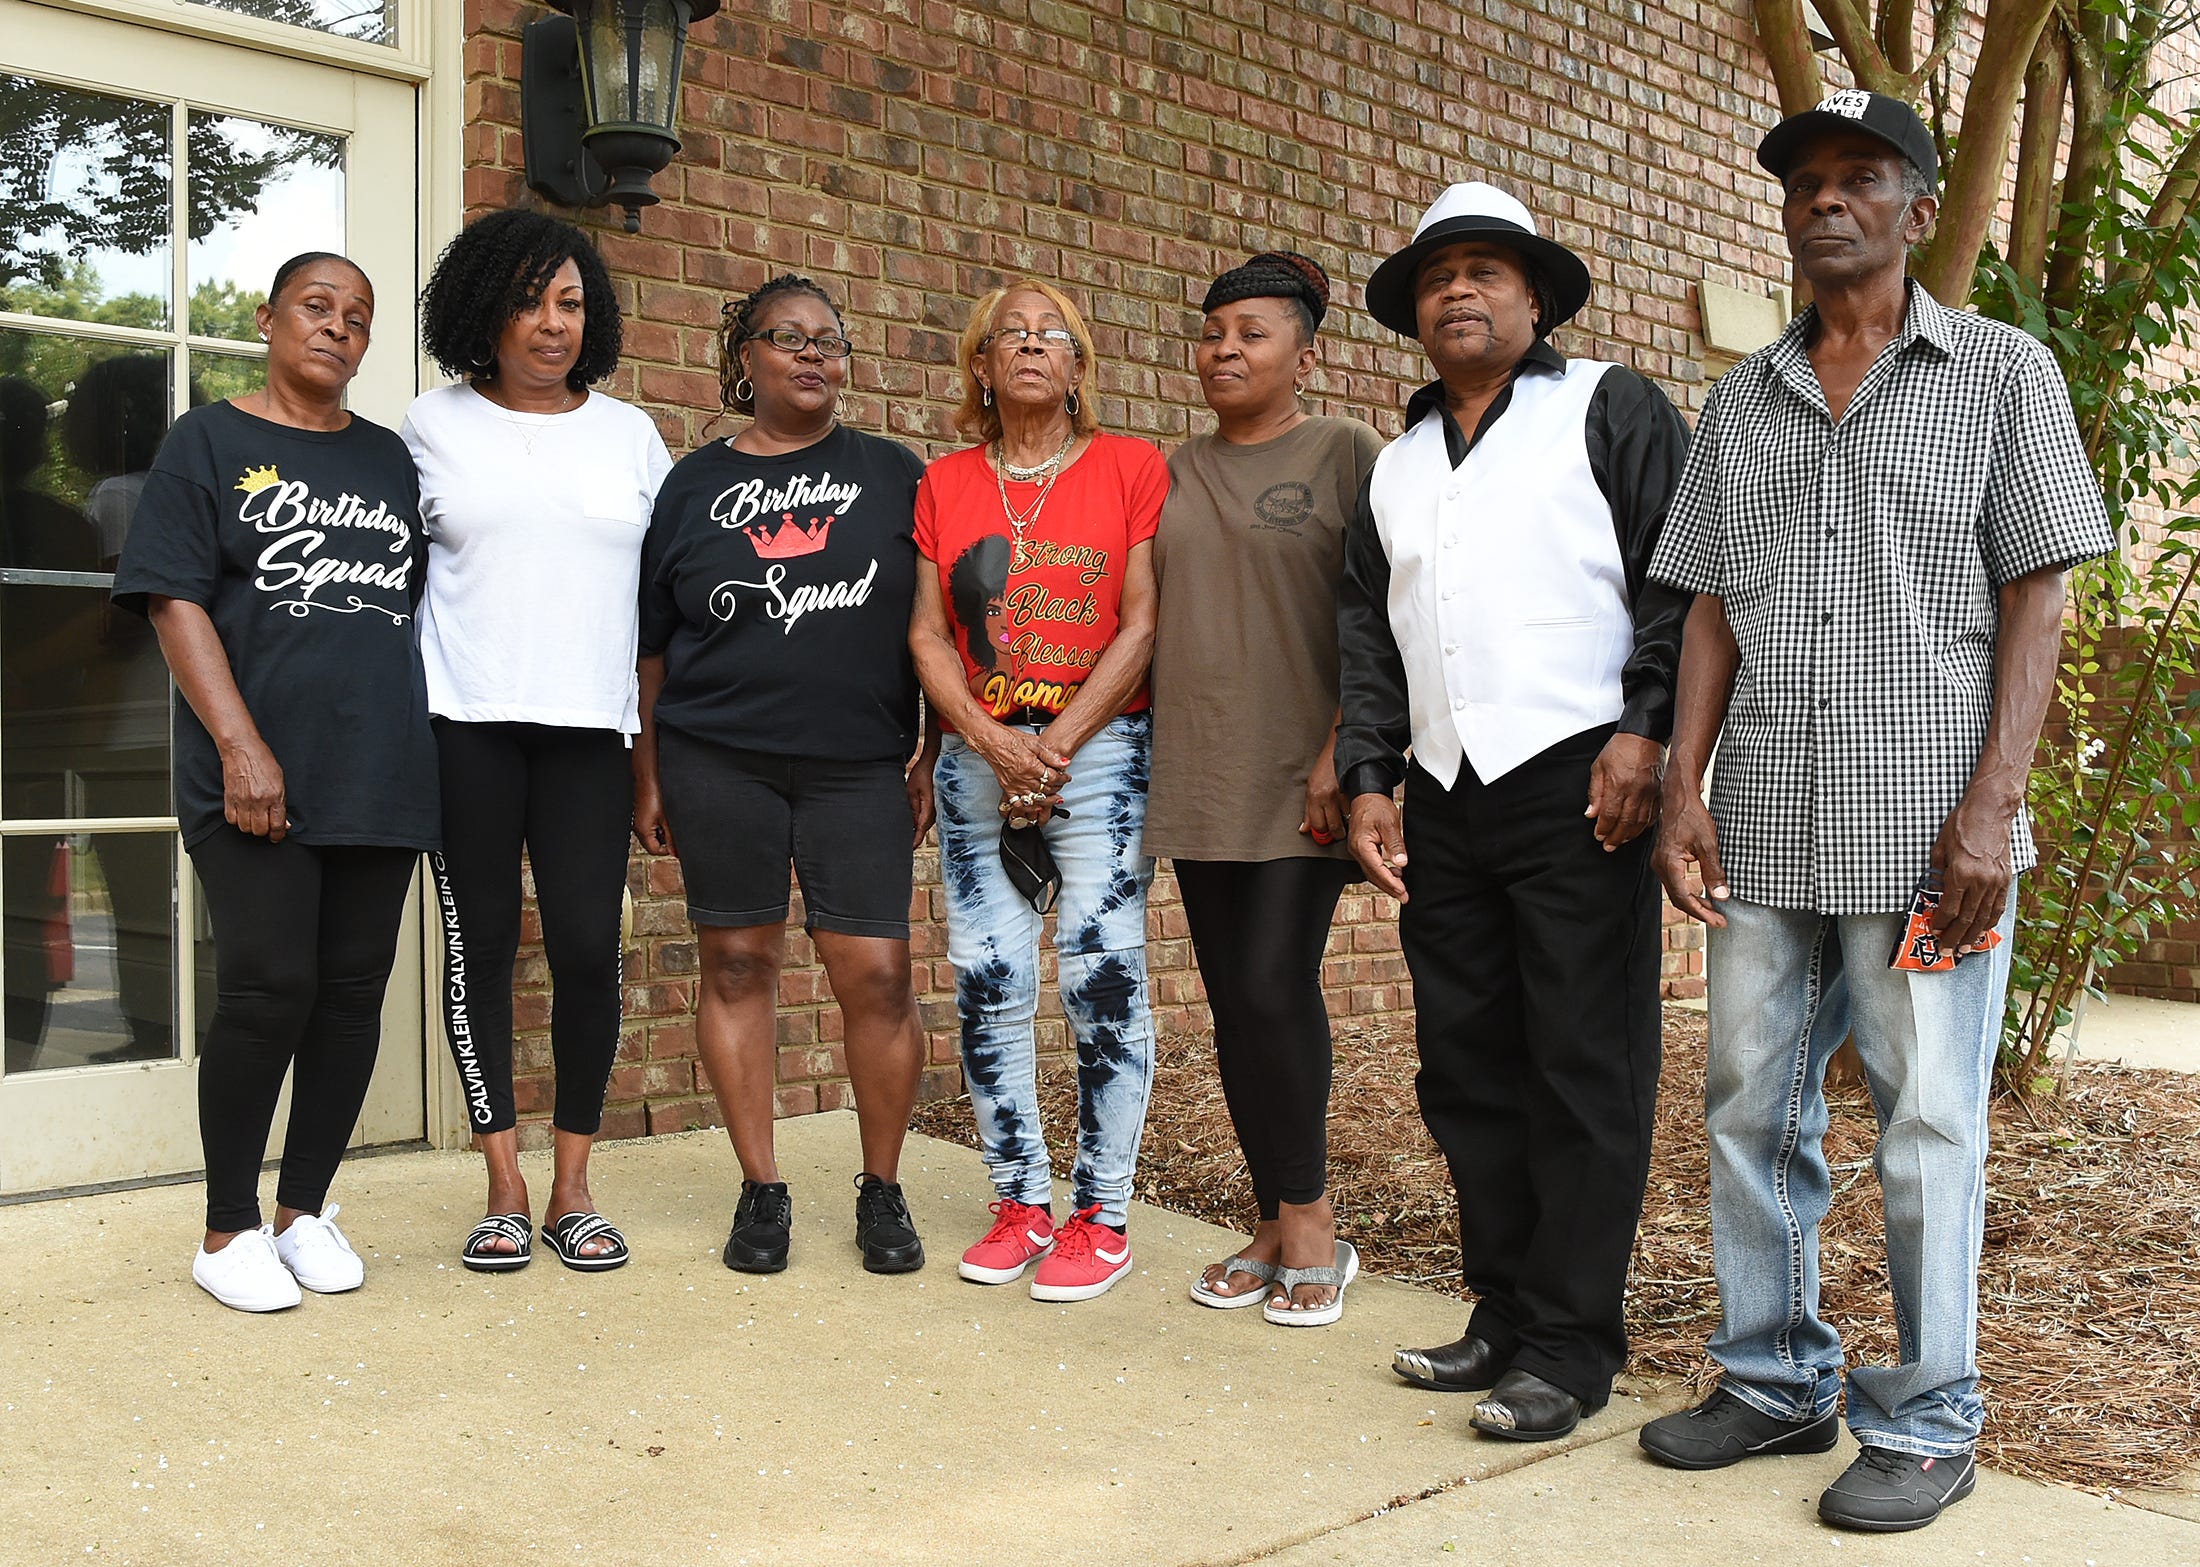 The Pettaway family at their attorney's office in Montgomery. Left to right: sisters Nancy Pettaway,  Patricia Pettaway and Jacqueline Thomas, mother Lizzie Mae Pettaway, sister Yvonne Frazier and bothers Walter and Otis Pettaway. Joseph Pettaway died in July of 2018 at a home in west Montgomery after being bitten by a police K9. The family has had difficulty finding any answers over what happened that night and is now suing two Montgomery police officers in federal court for excessive force and wrongful death. (Joe Songer | jsonger@al.com).